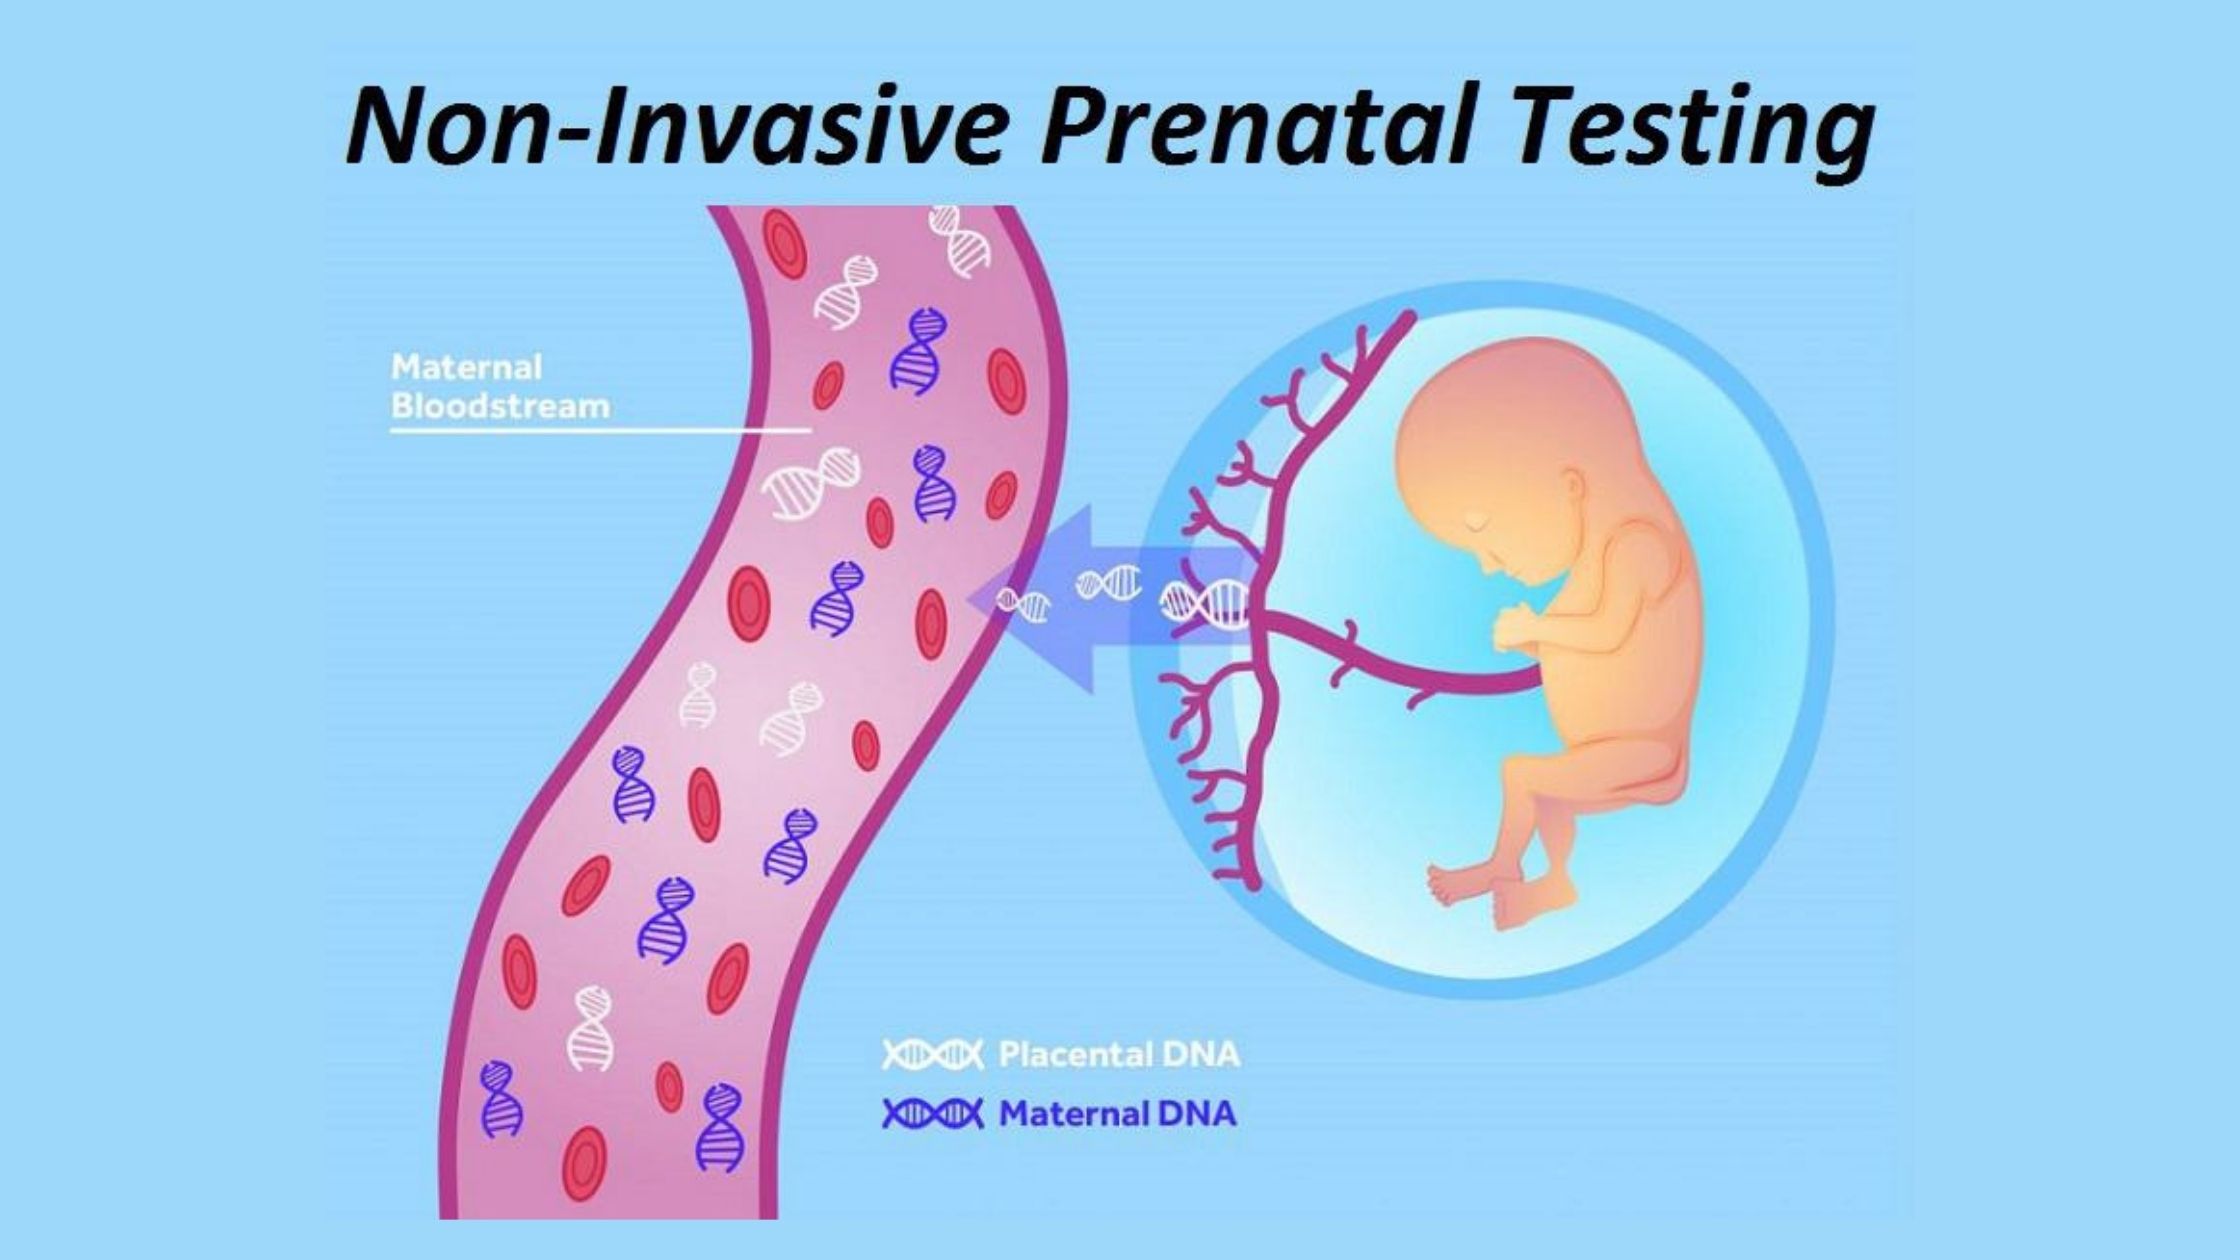 Cell-free fetal DNA